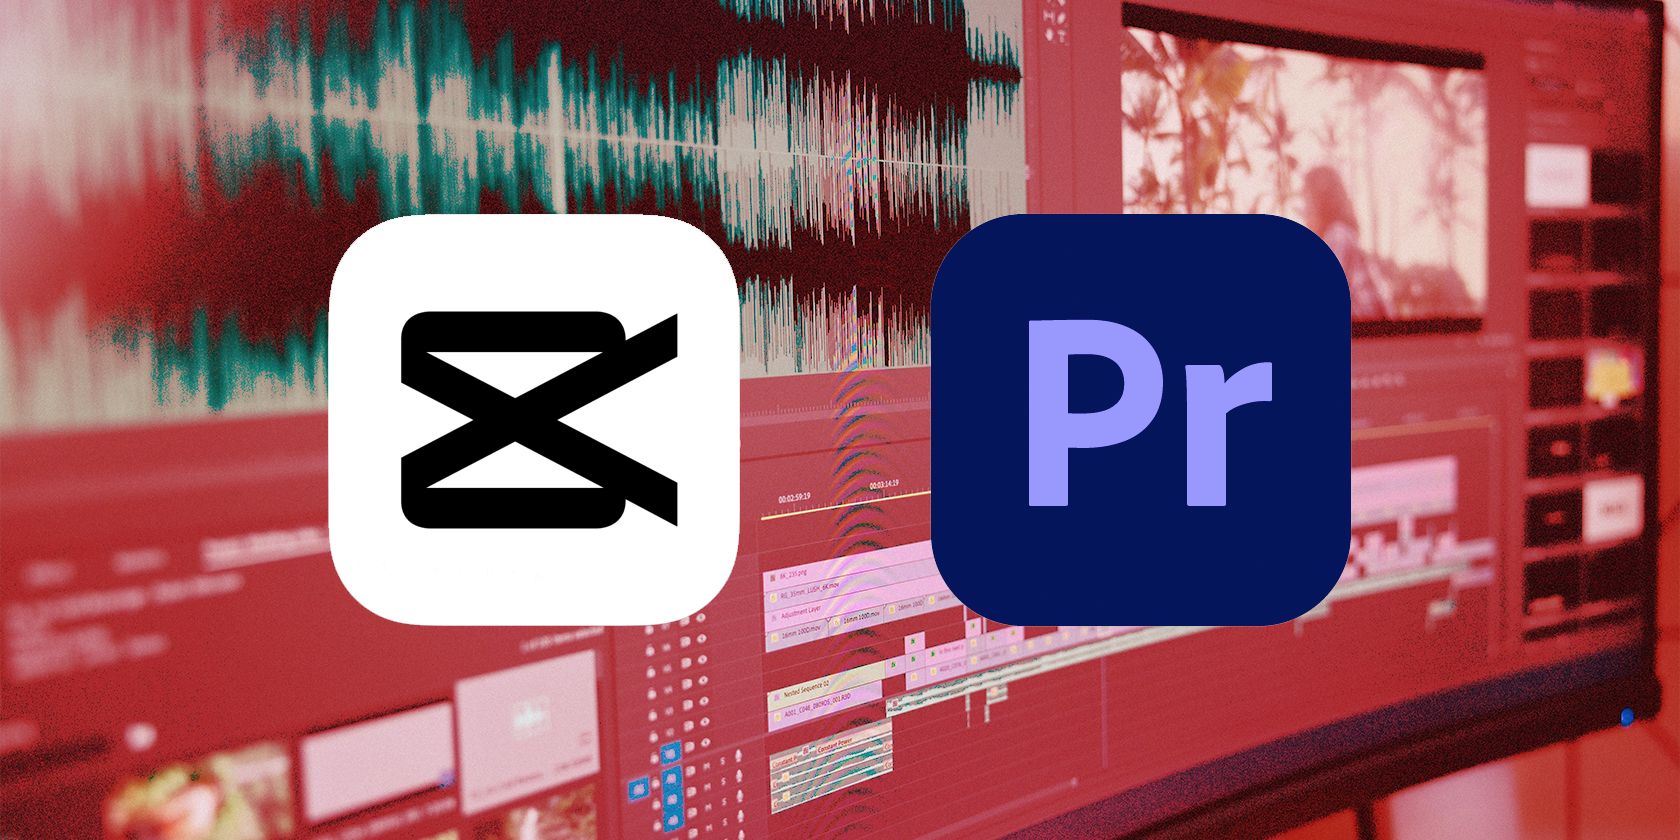 CapCut and Premiere Pro Logos Overlaid on Background of Video Editing Software.